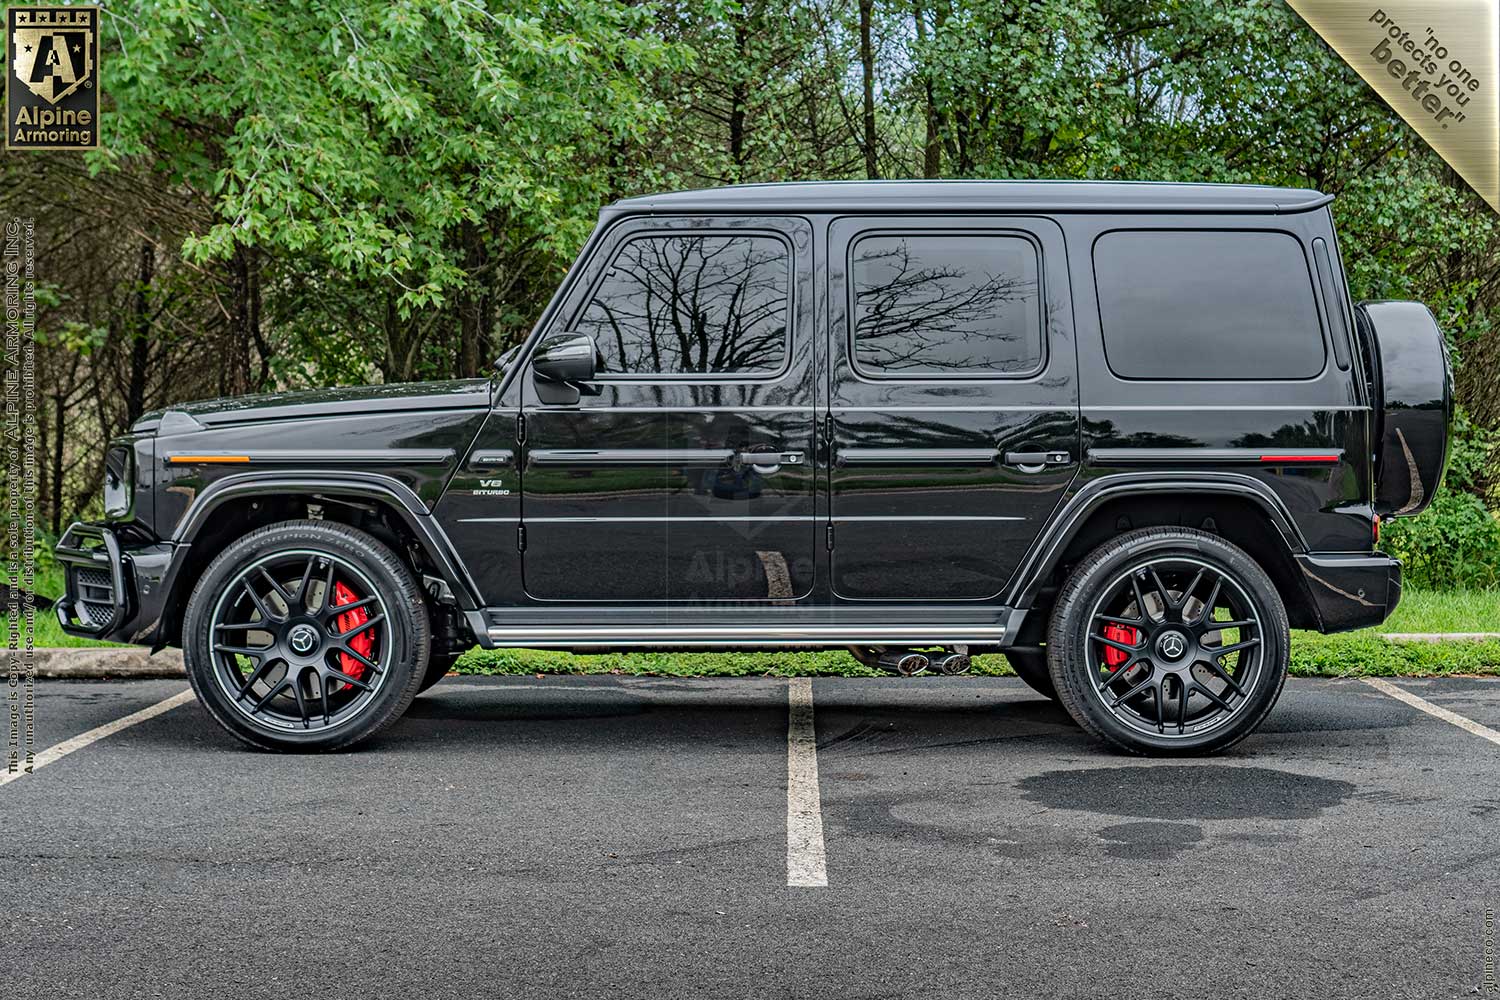 New Inventory Armored Mercedes-Benz G63 Level A9/B6+ Exterior & Interior Images VIN:5920